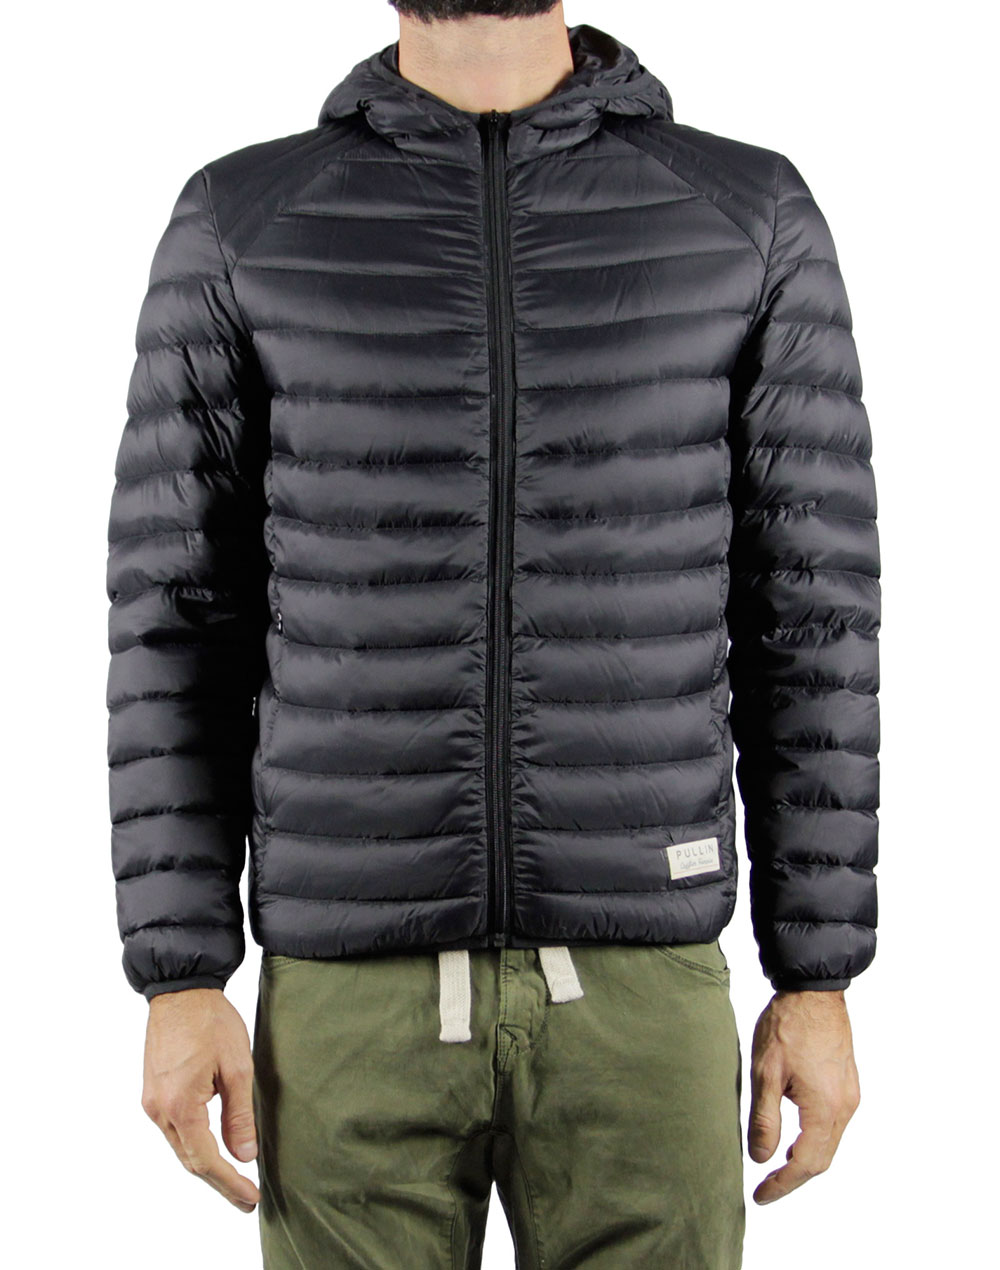 Men's feather jacket with hood LEAP